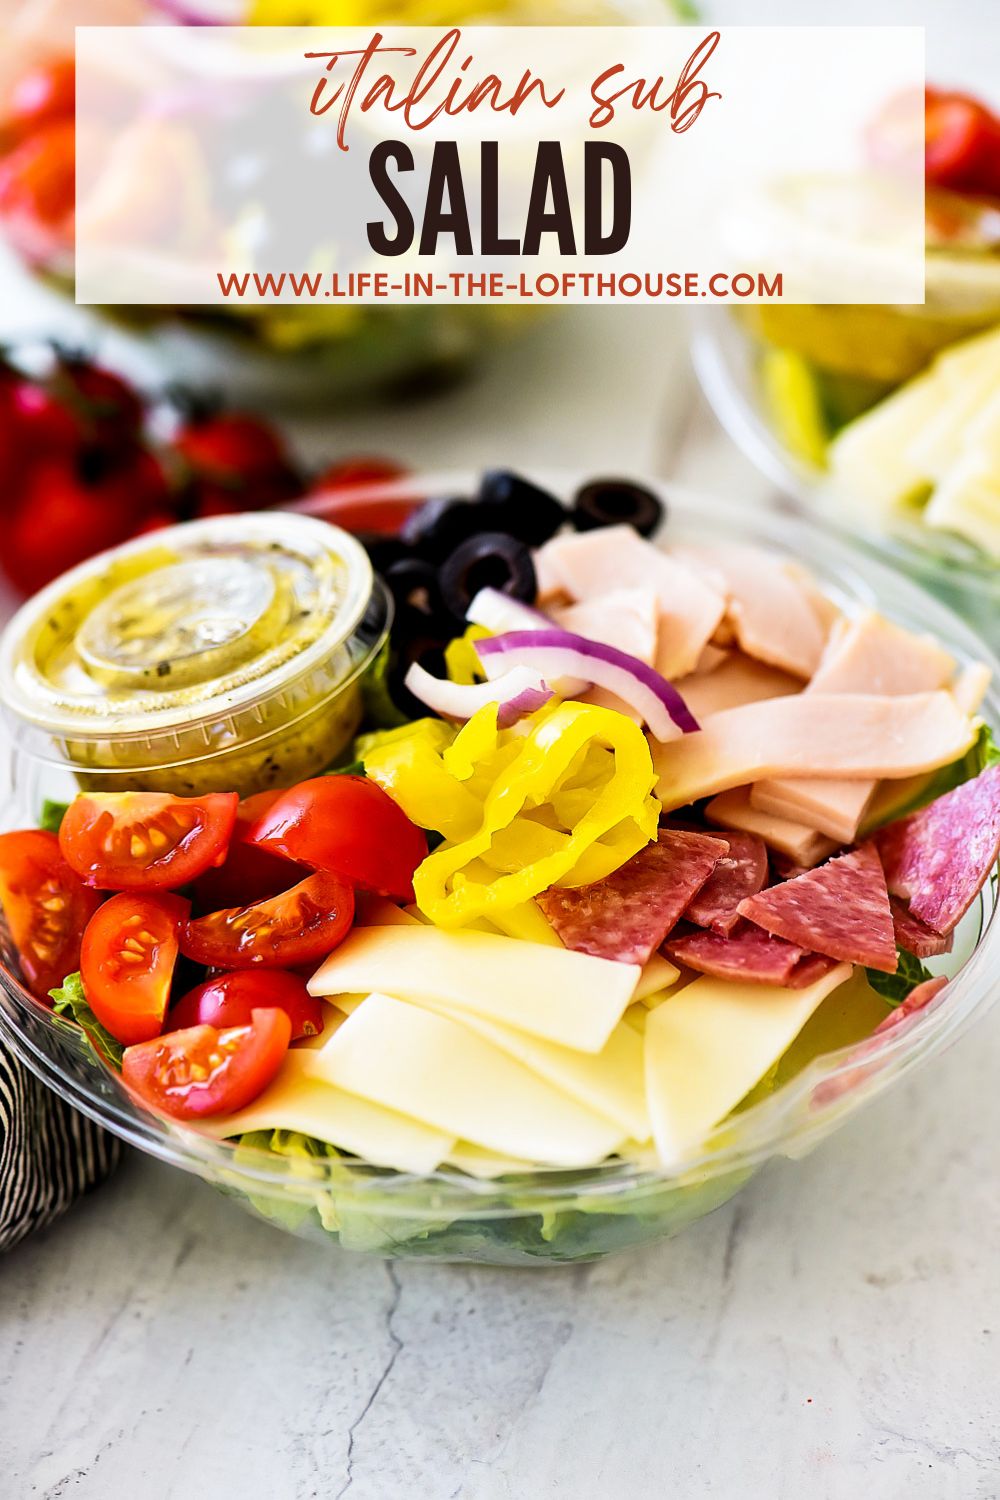 Italian Sub Salad is filled with sliced turkey, salami, provolone cheese, banana peppers, sliced olives and cherry tomatoes. Life-in-the-Lofthouse.com